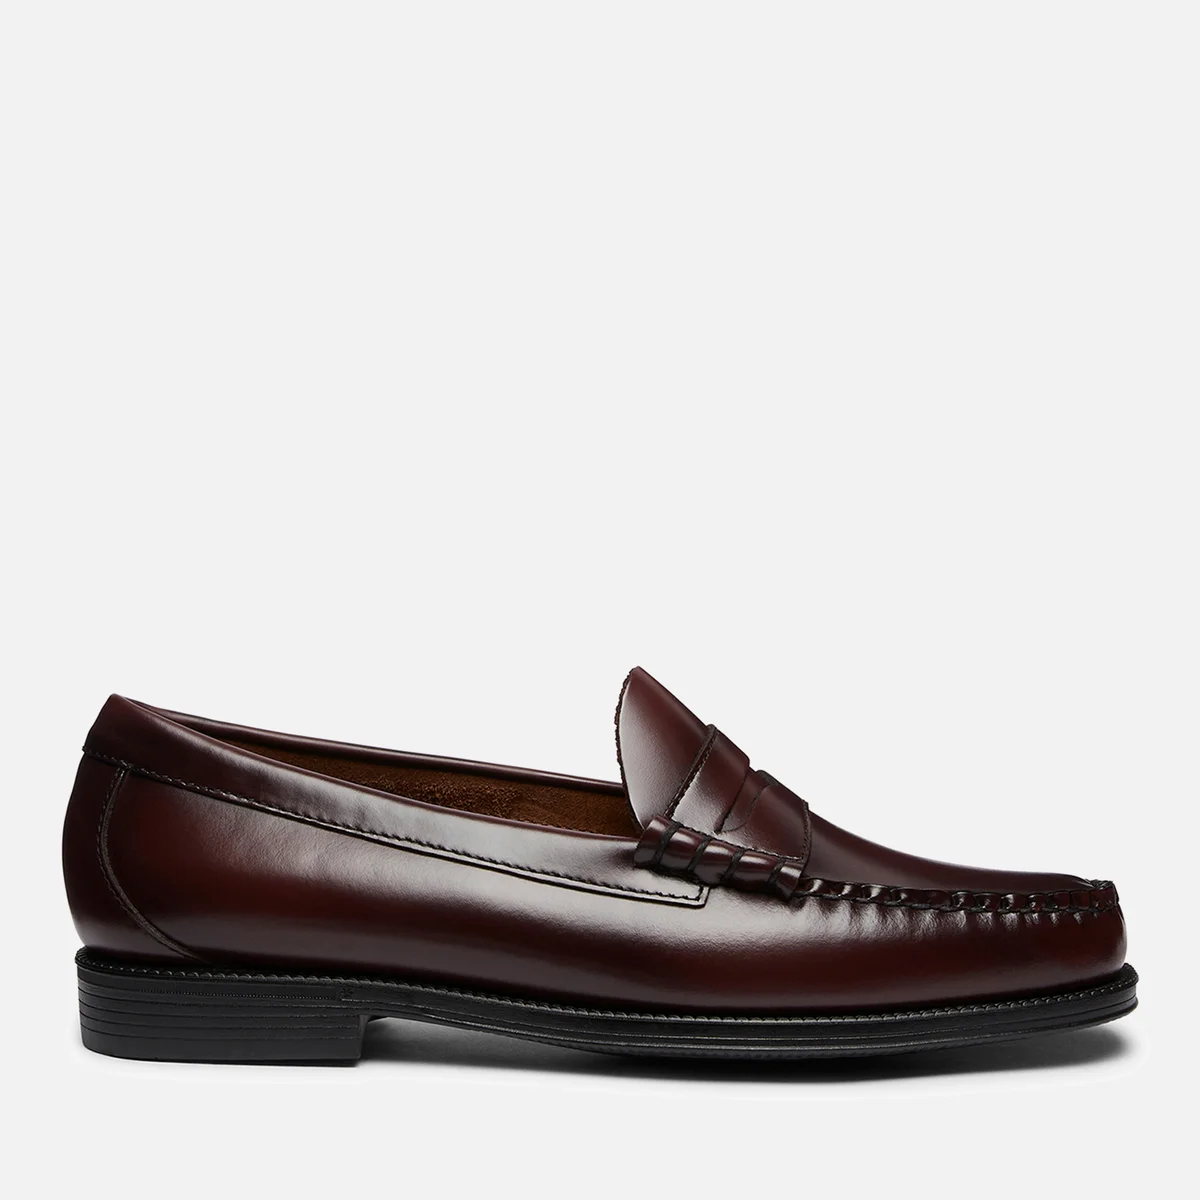 G.H.BASS Men's Weejun Larson Leather Penny Loafers Image 1